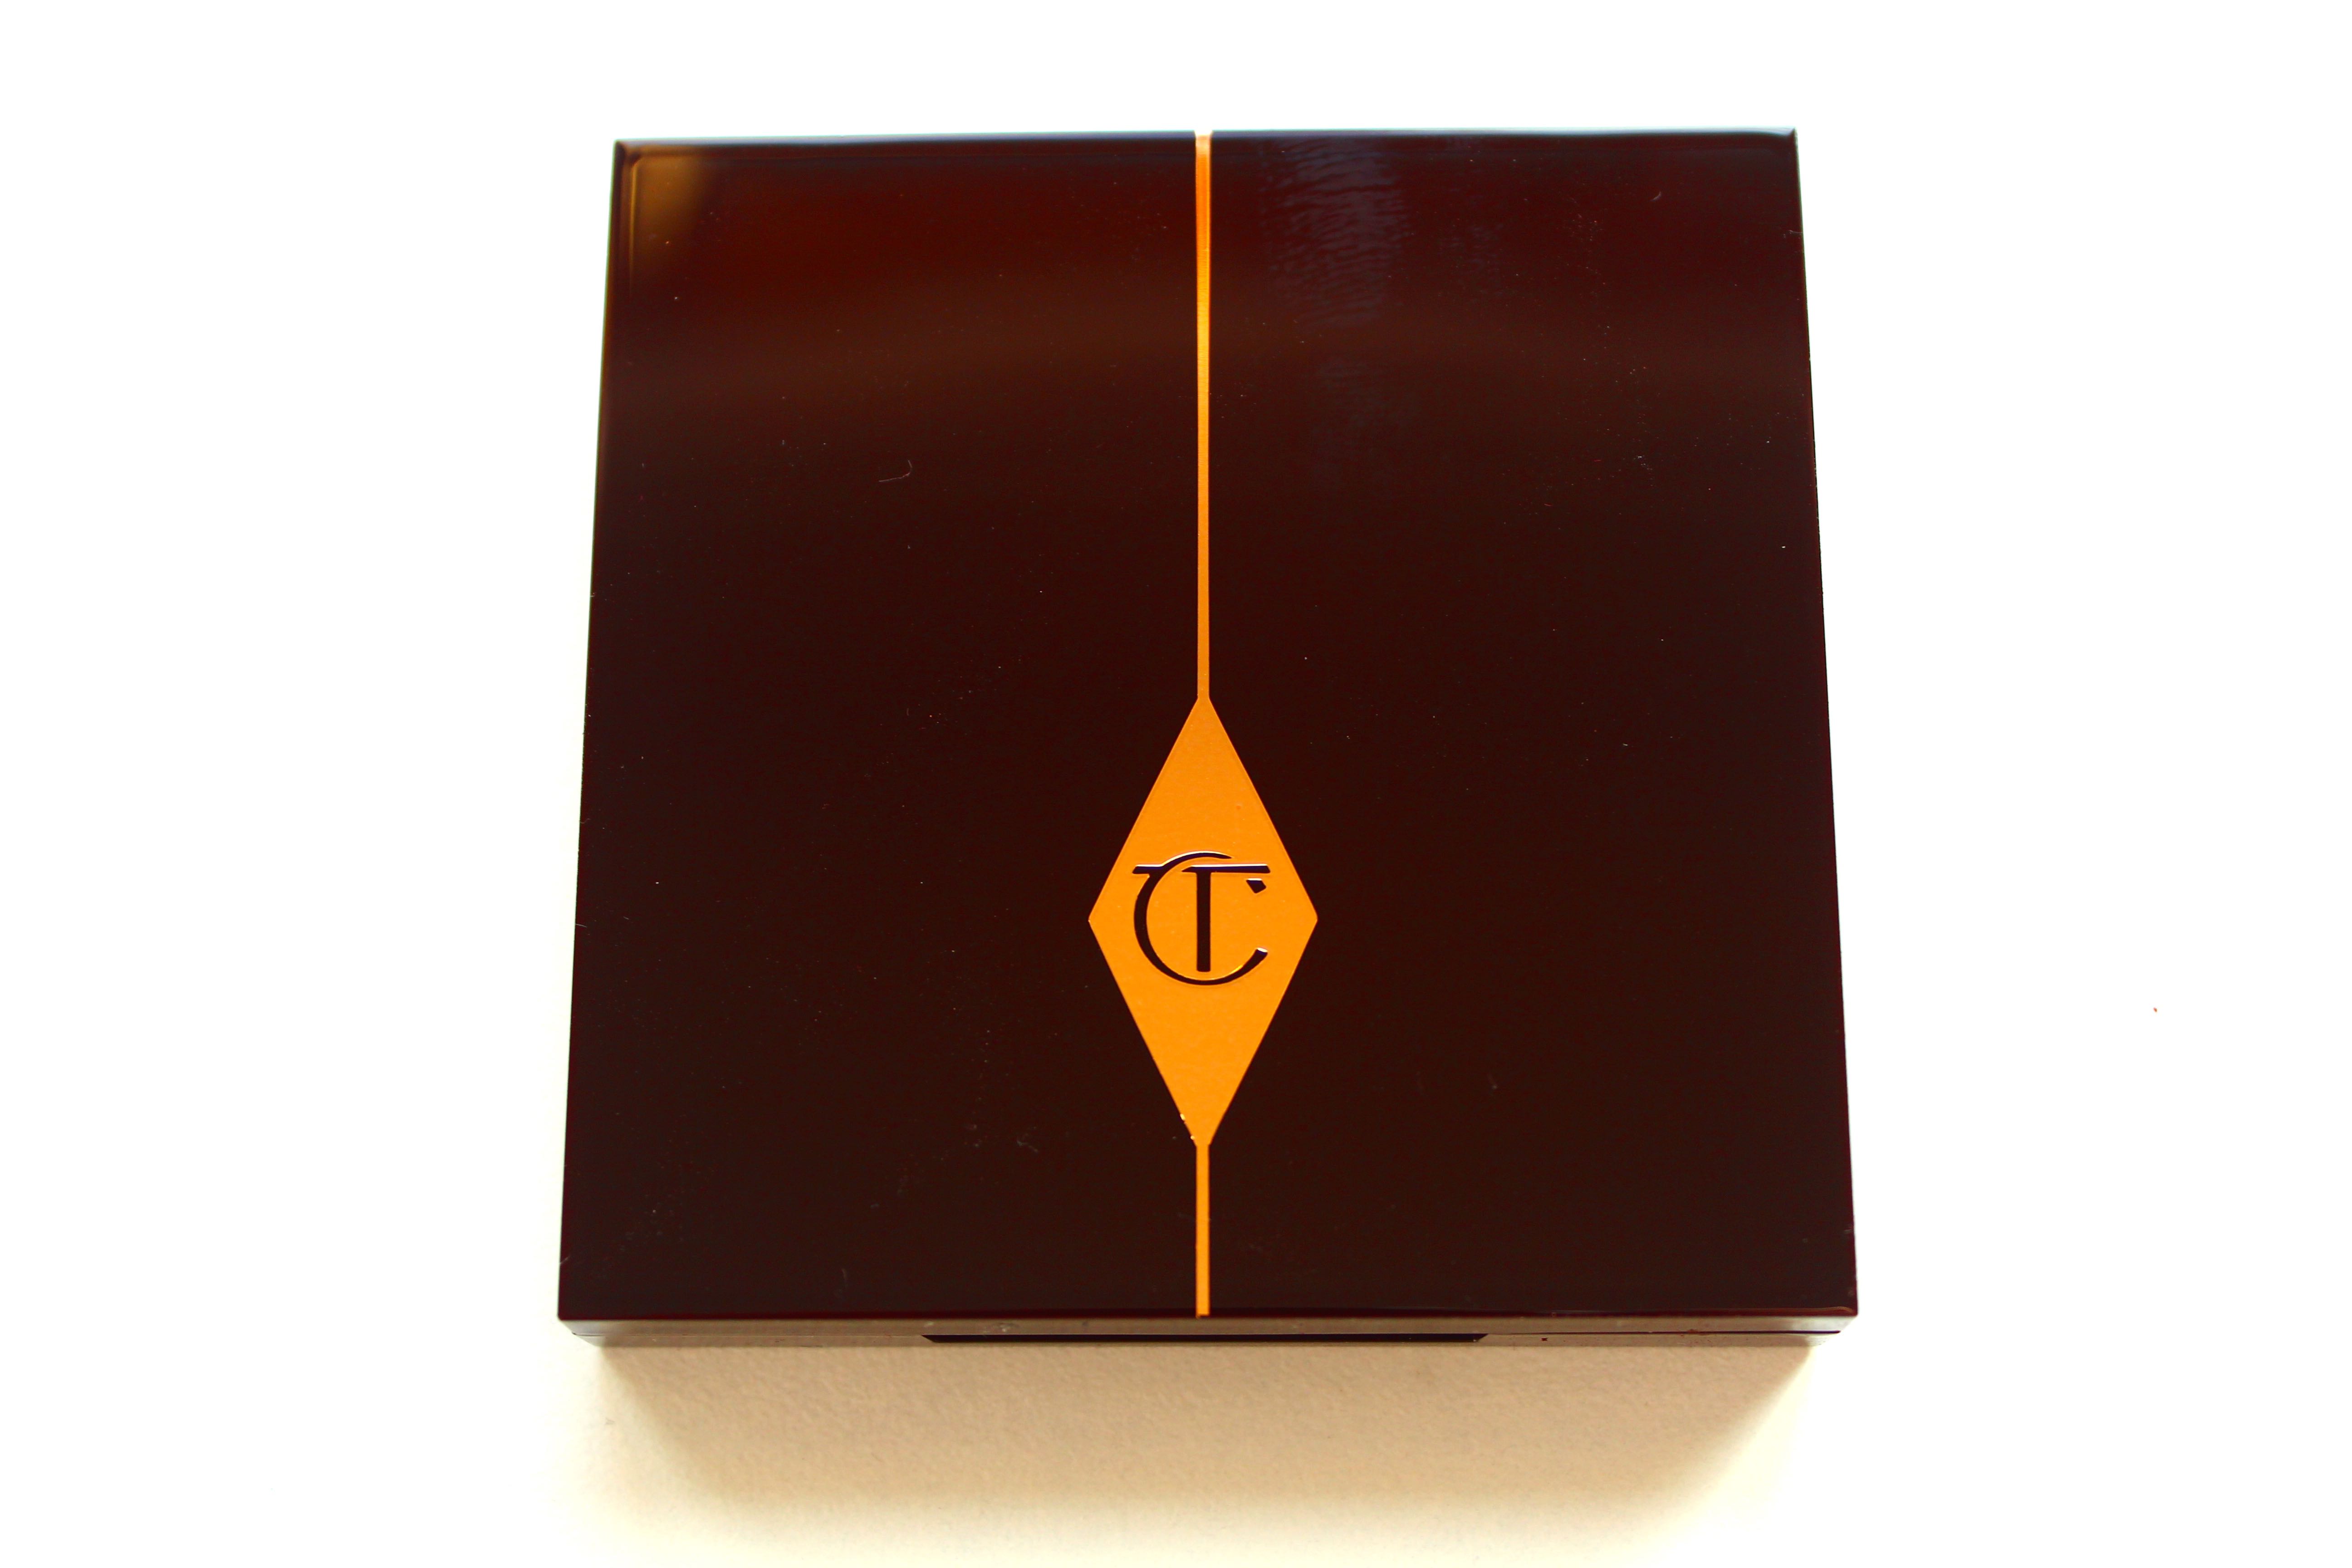 Charlotte-Tilbury-Haul-and-product-review-all-in-one-Luxury-palette-The-Dolce-Vita-beautiful-sleek-compact-by-face-made-up-facemadeup